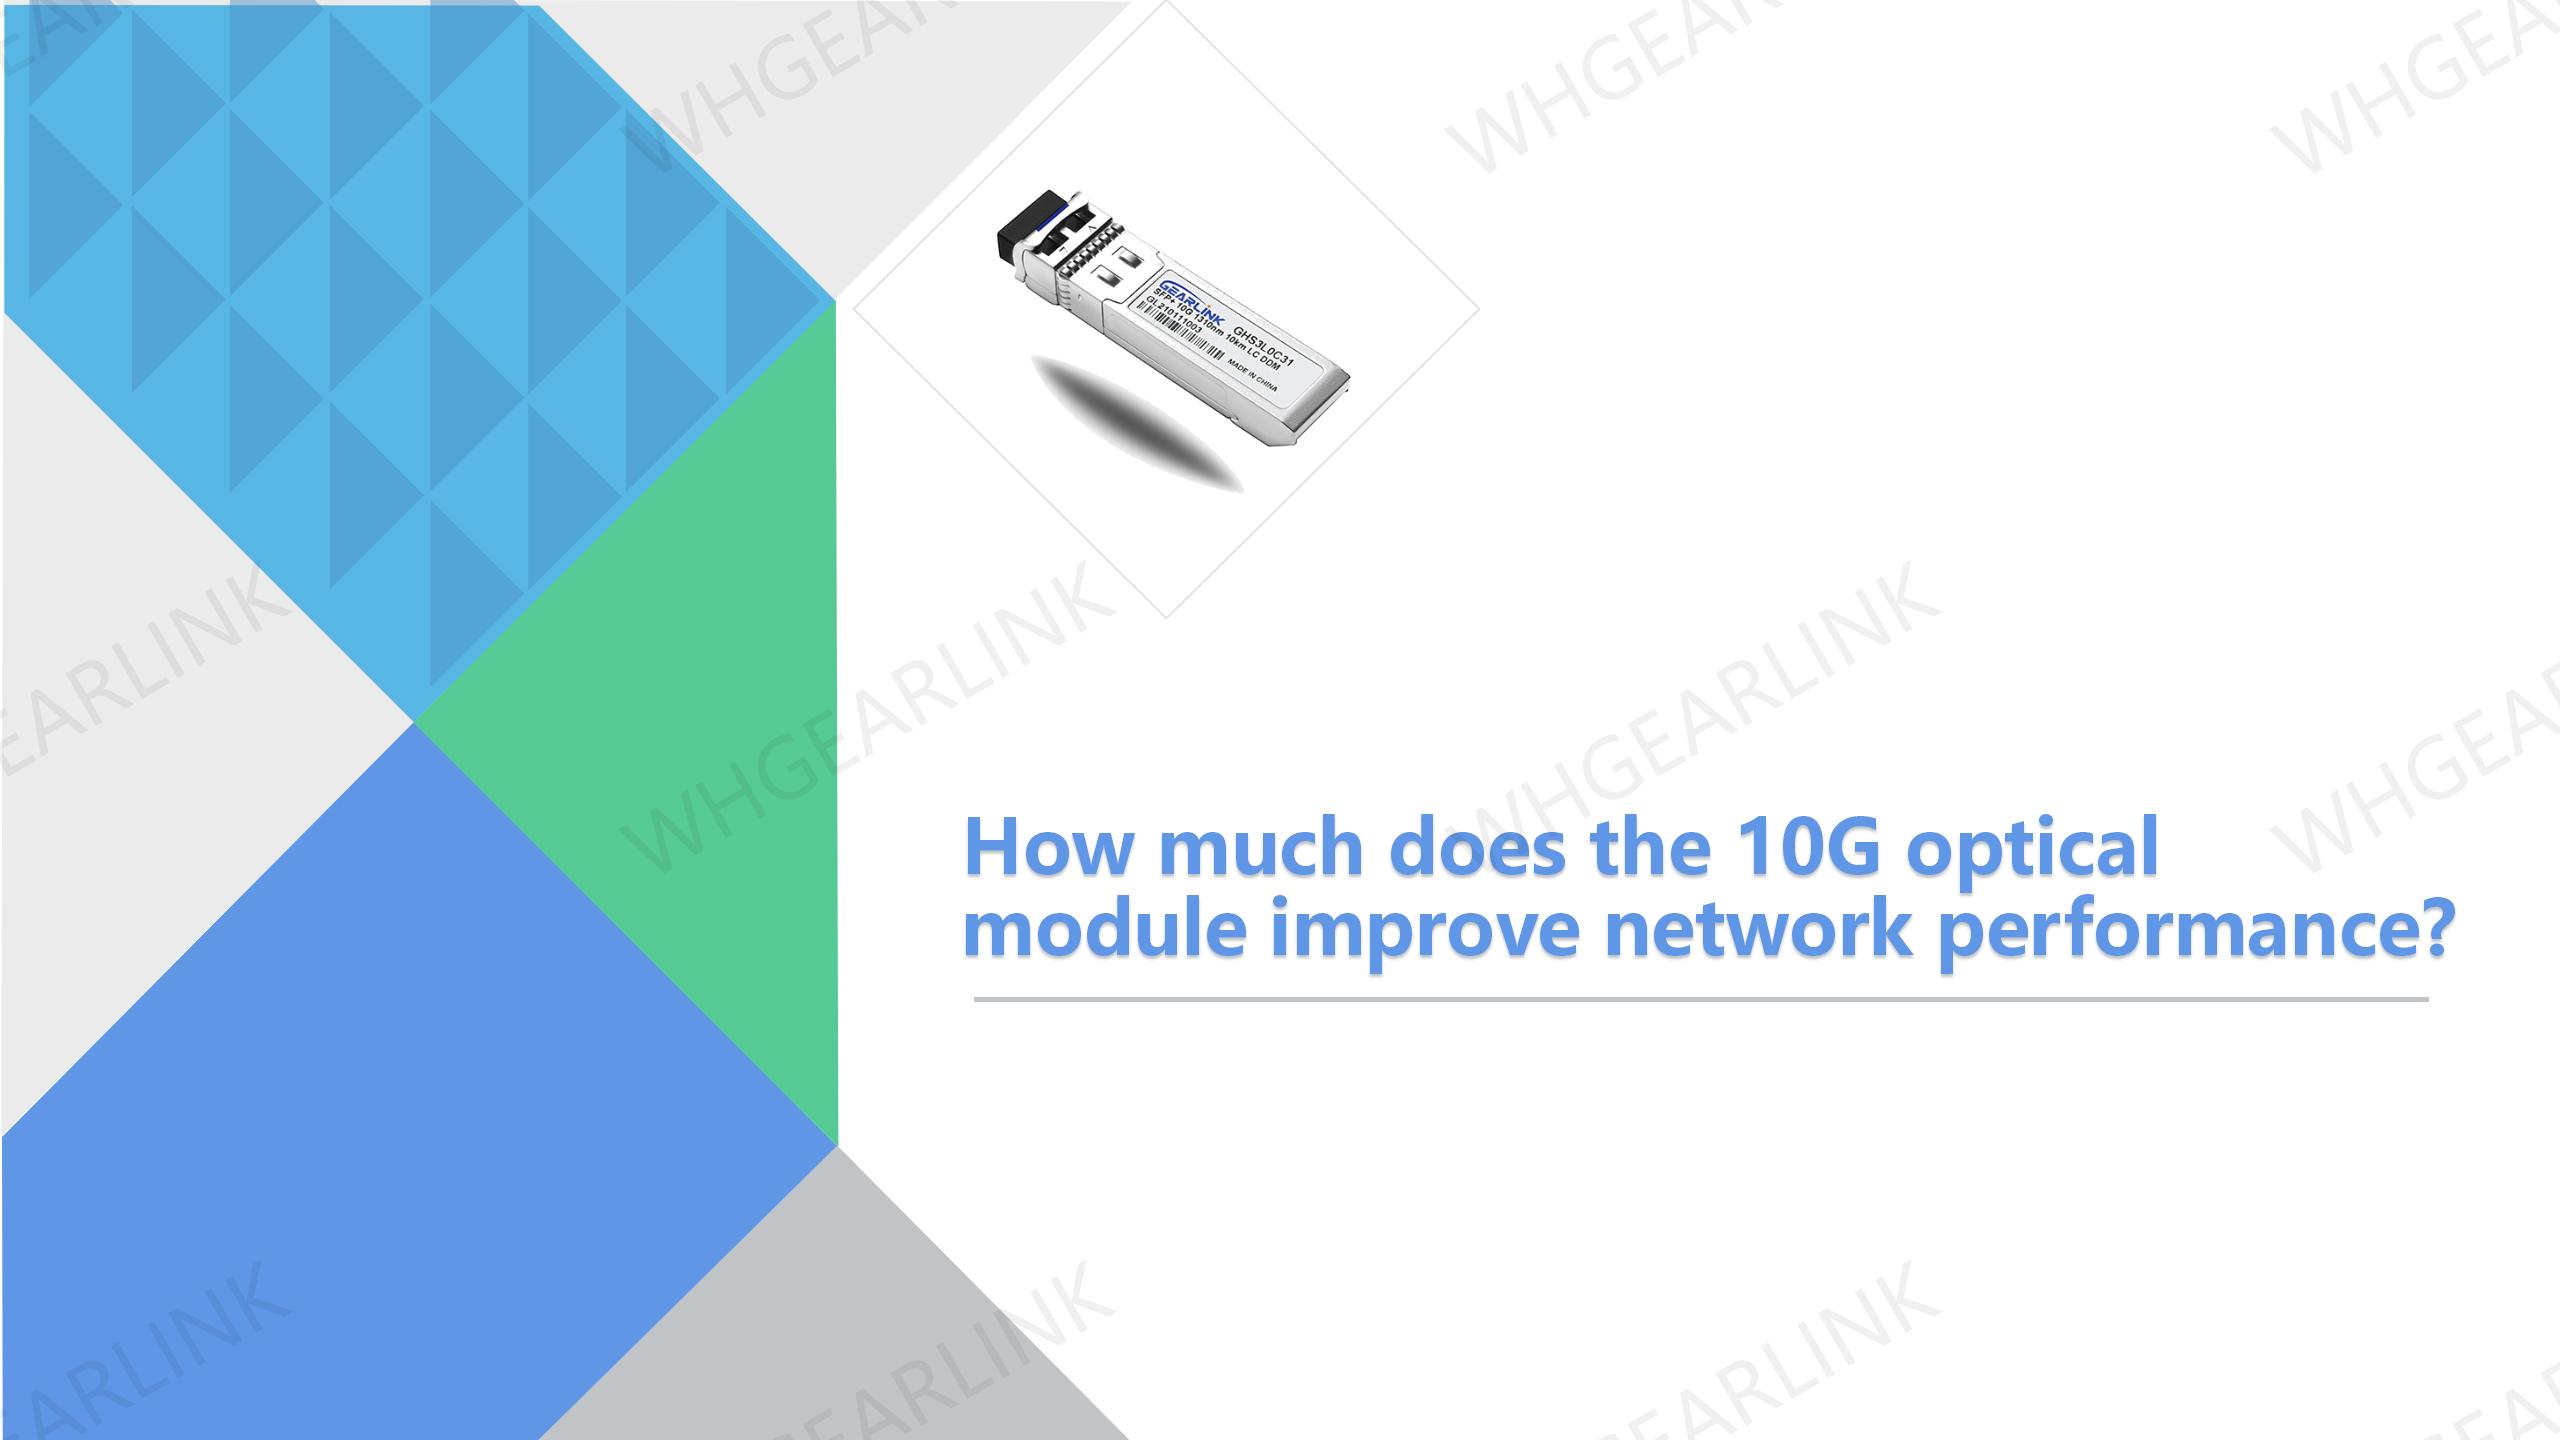 How much does the 10G optical module improve network performance?